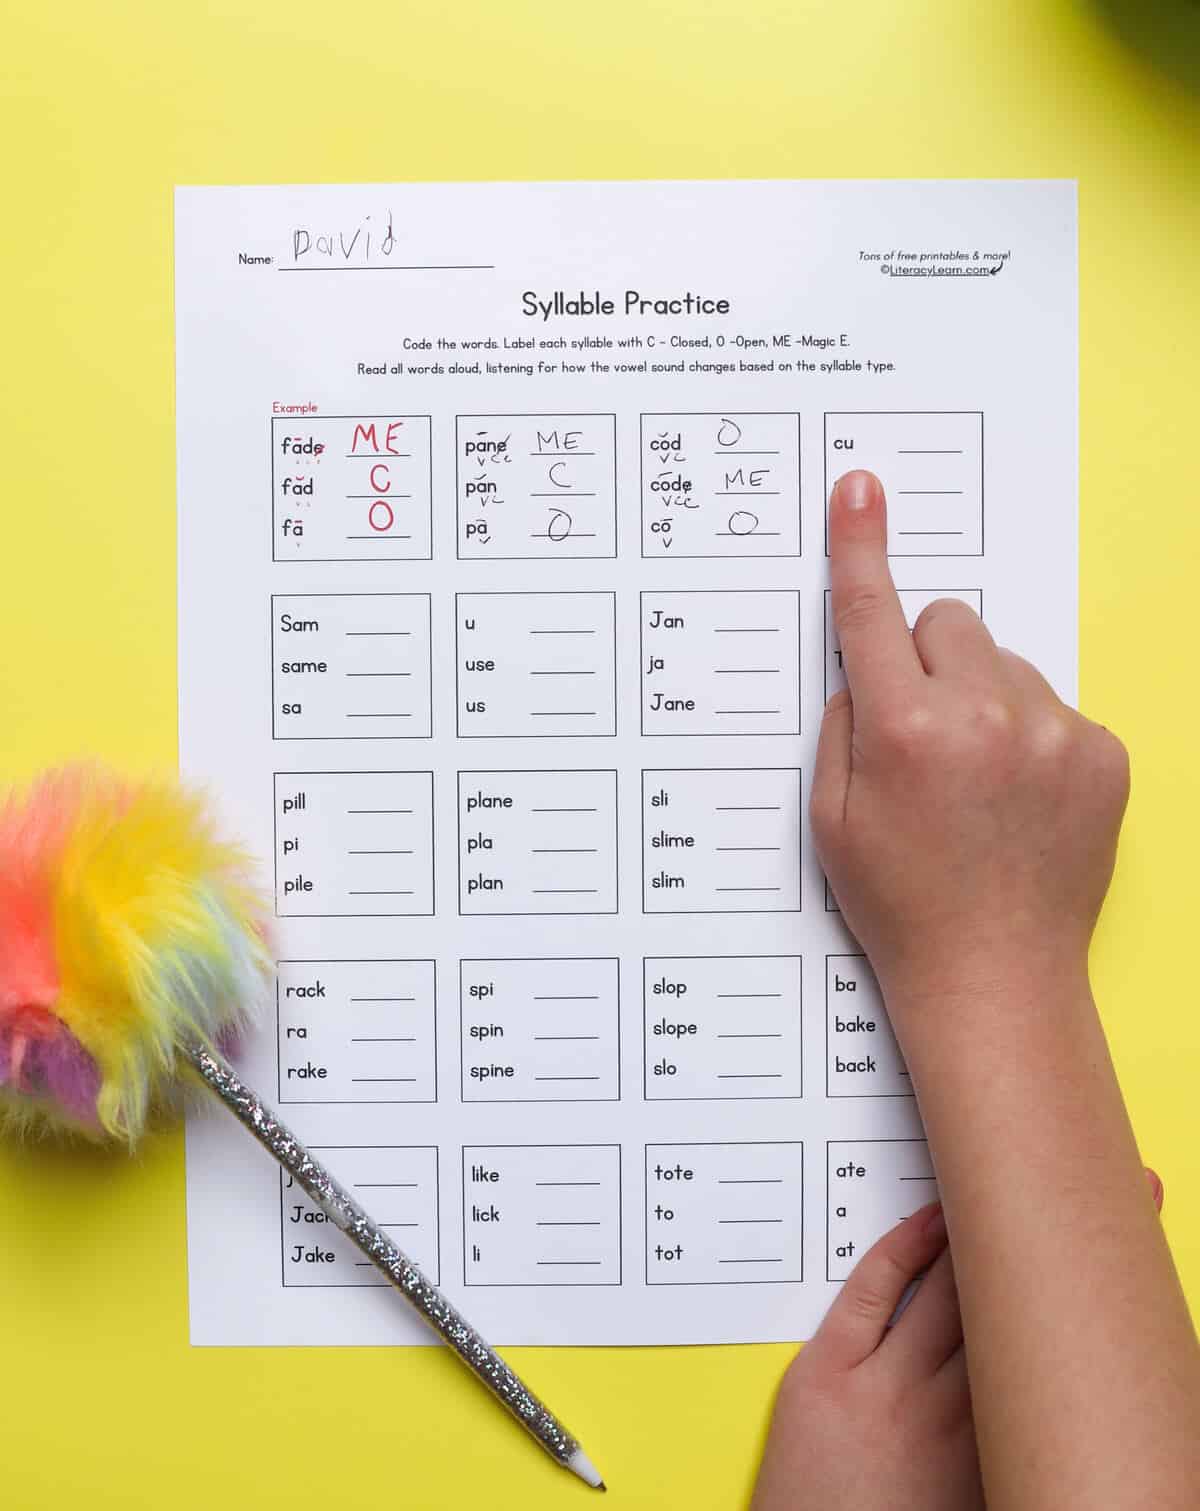 A child's hand pointing to words on the Magic e syllable type practice worksheet.